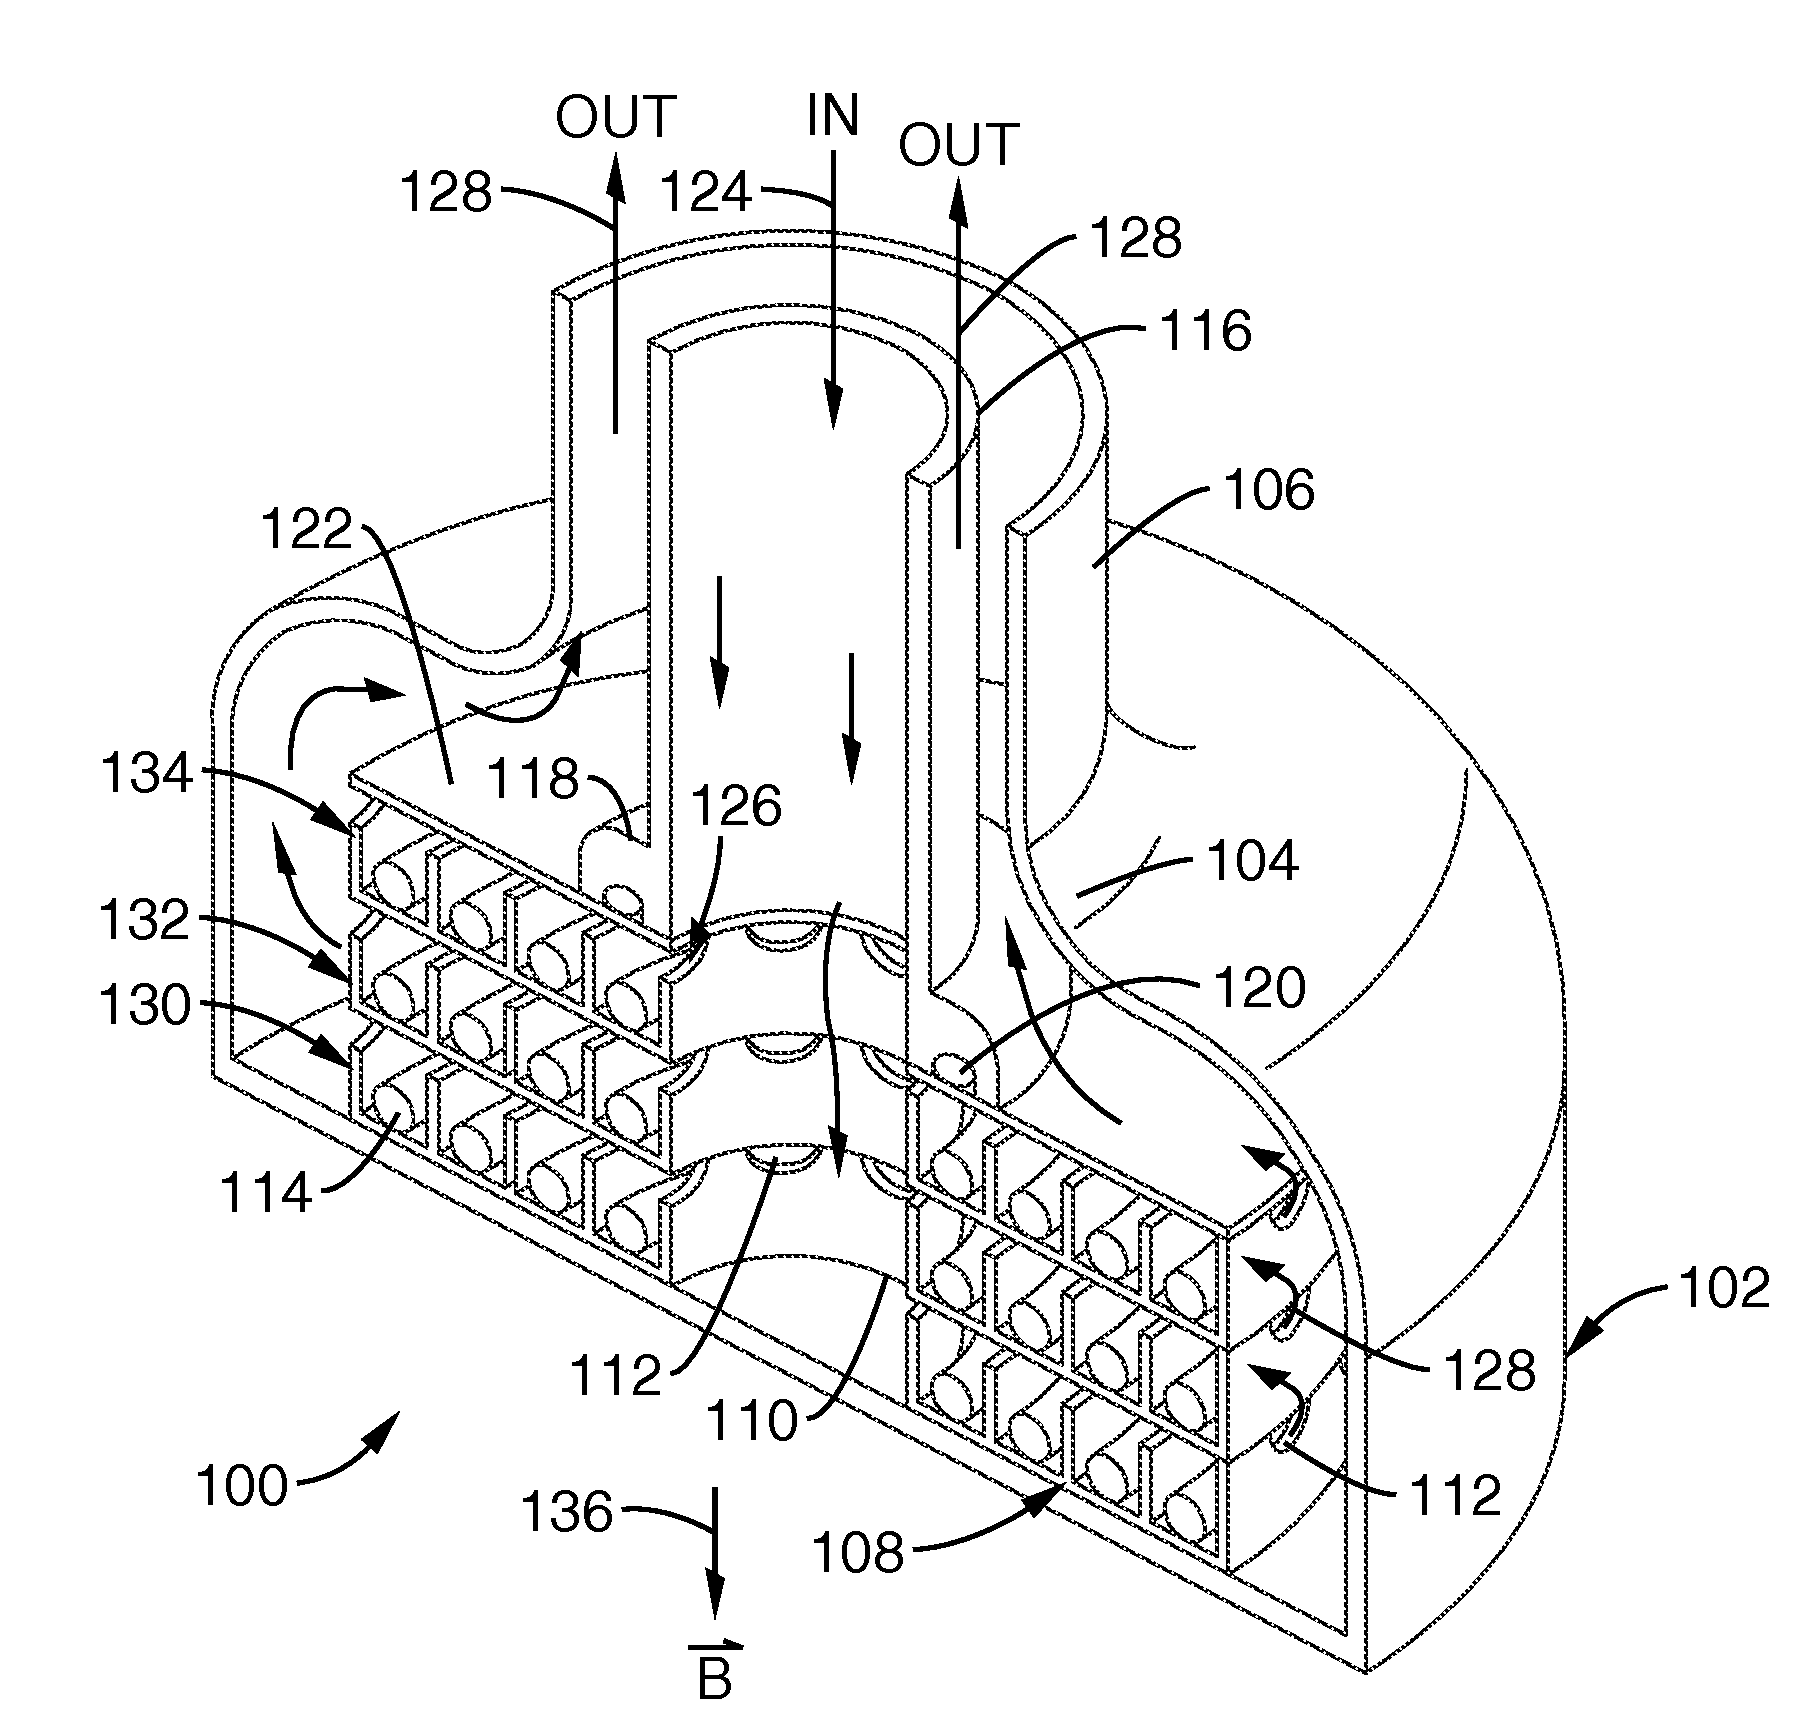 Apparatus and method for transcranial and nerve magnetic stimulation